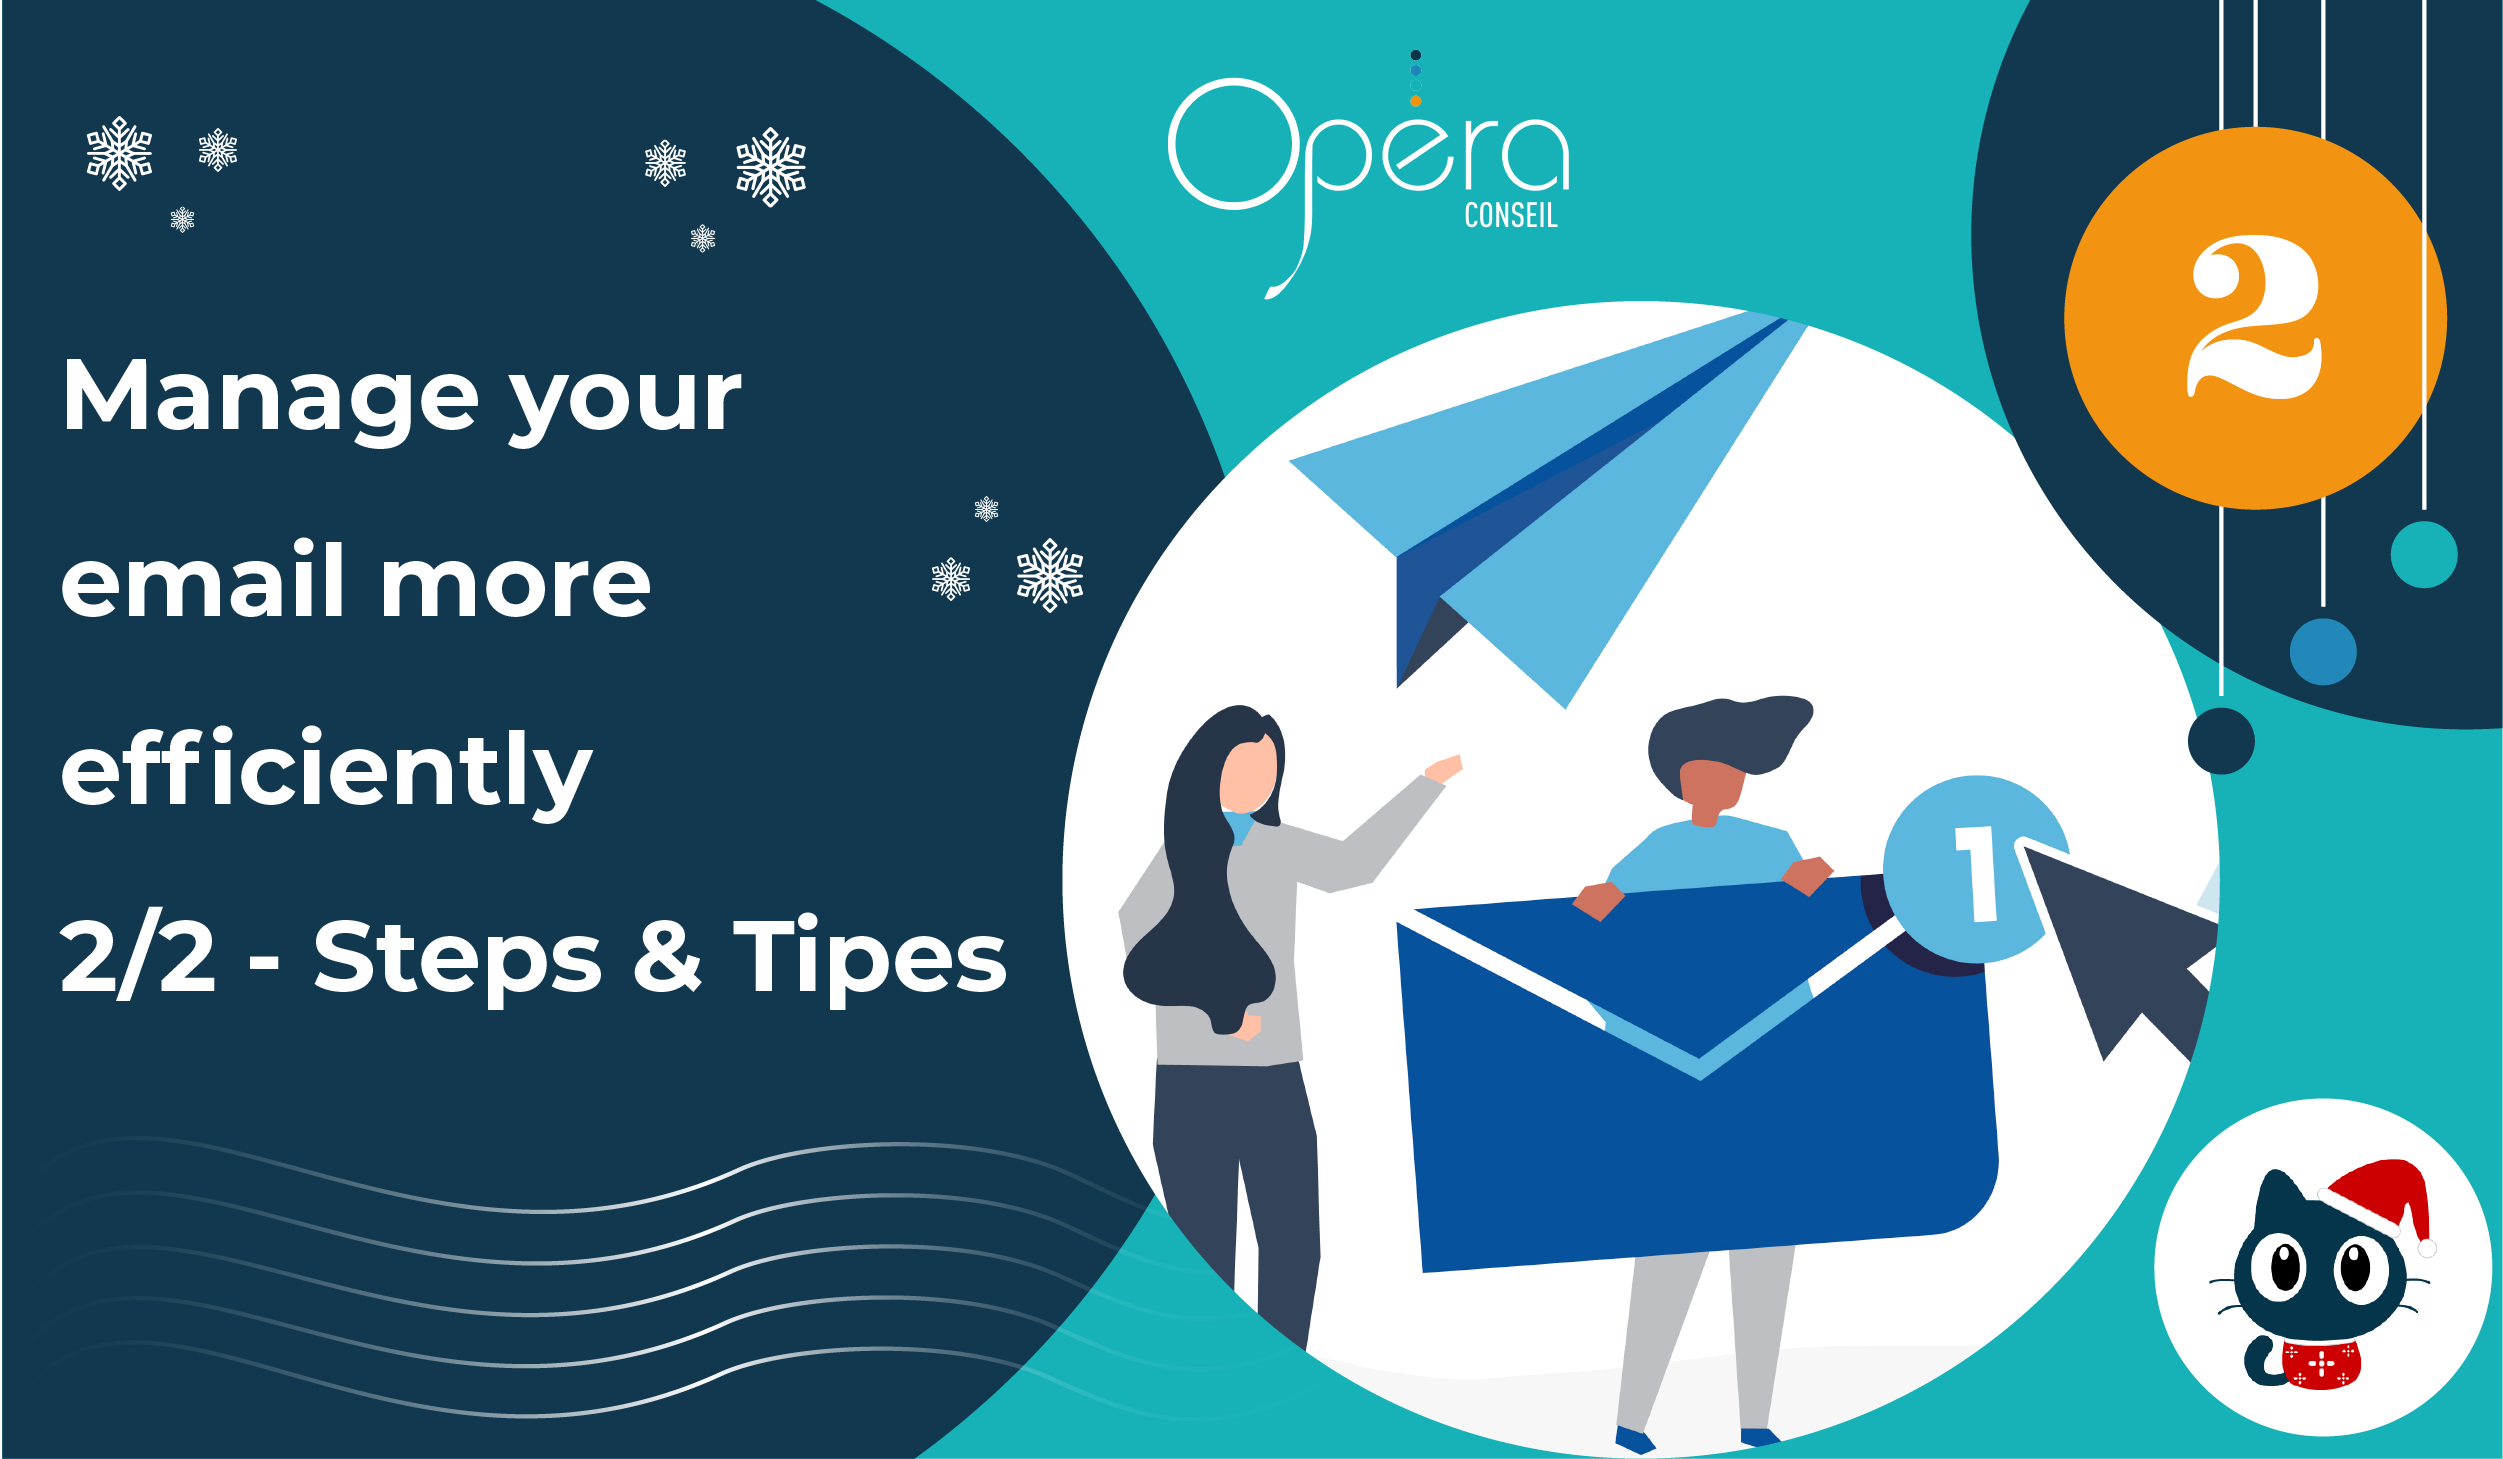 manage your email more efficiently 2/2 - steps & tips